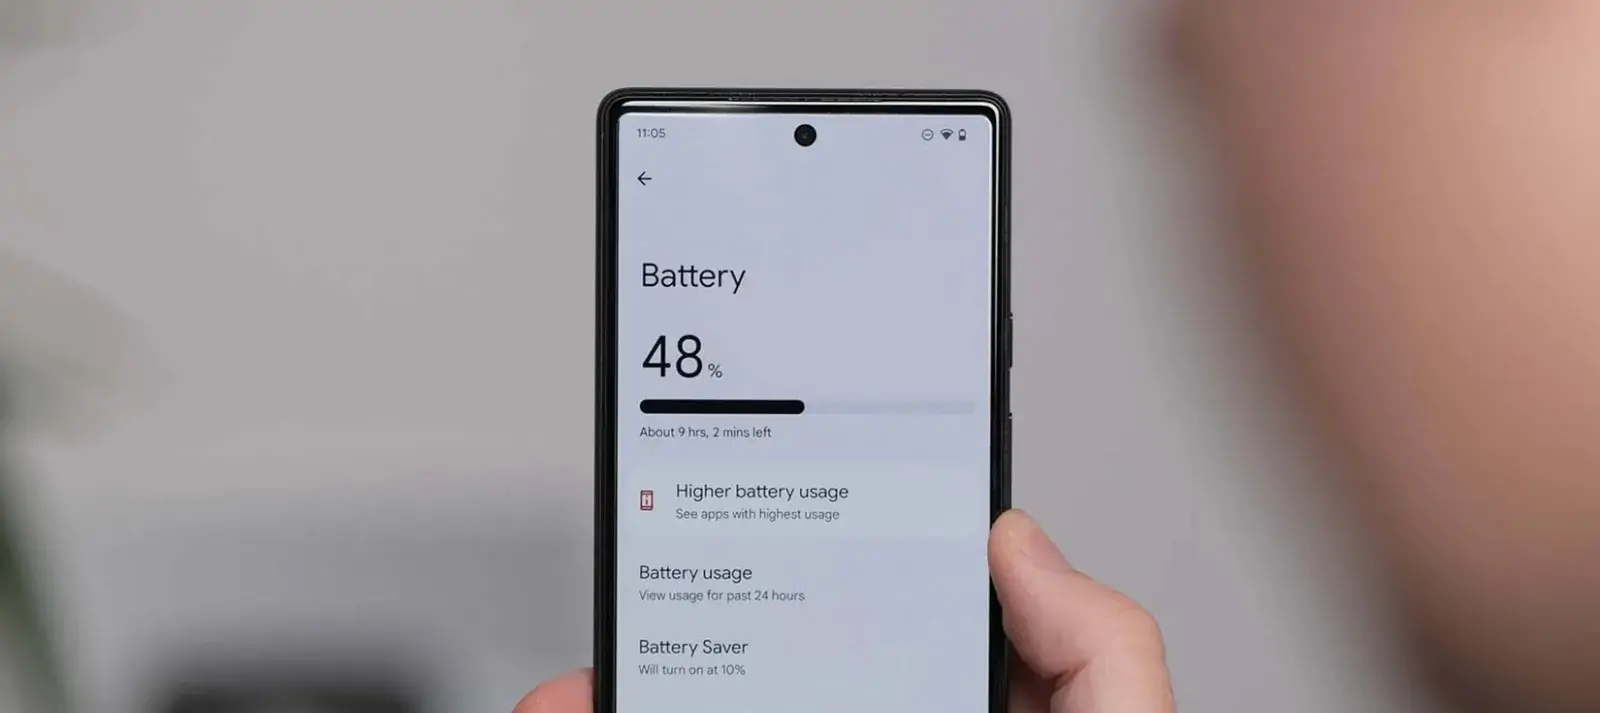 Performance and Battery Life